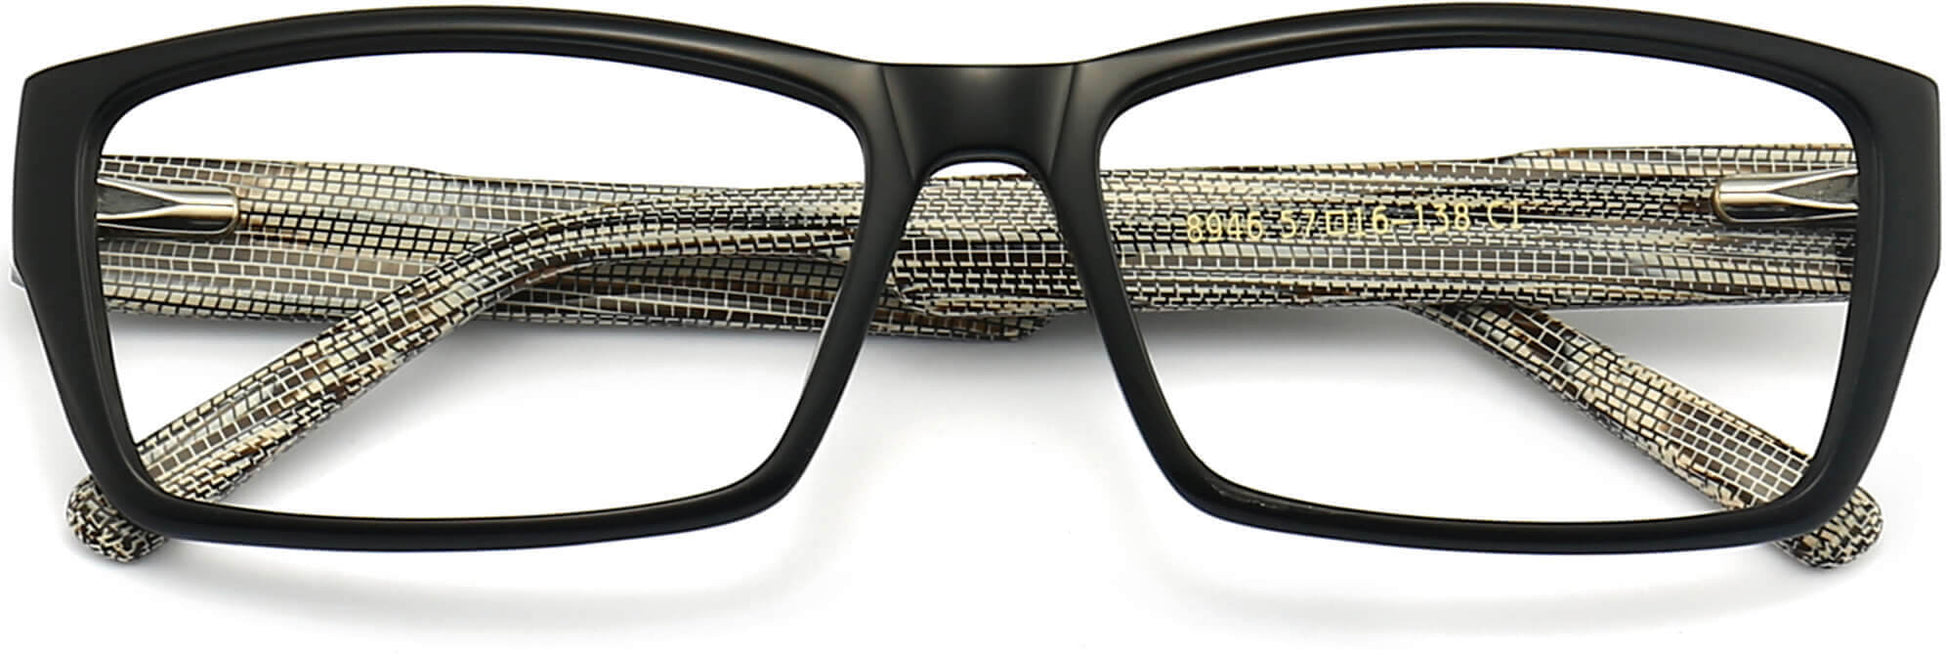 Moises Rectangle Black Eyeglasses from ANRRI, closed view